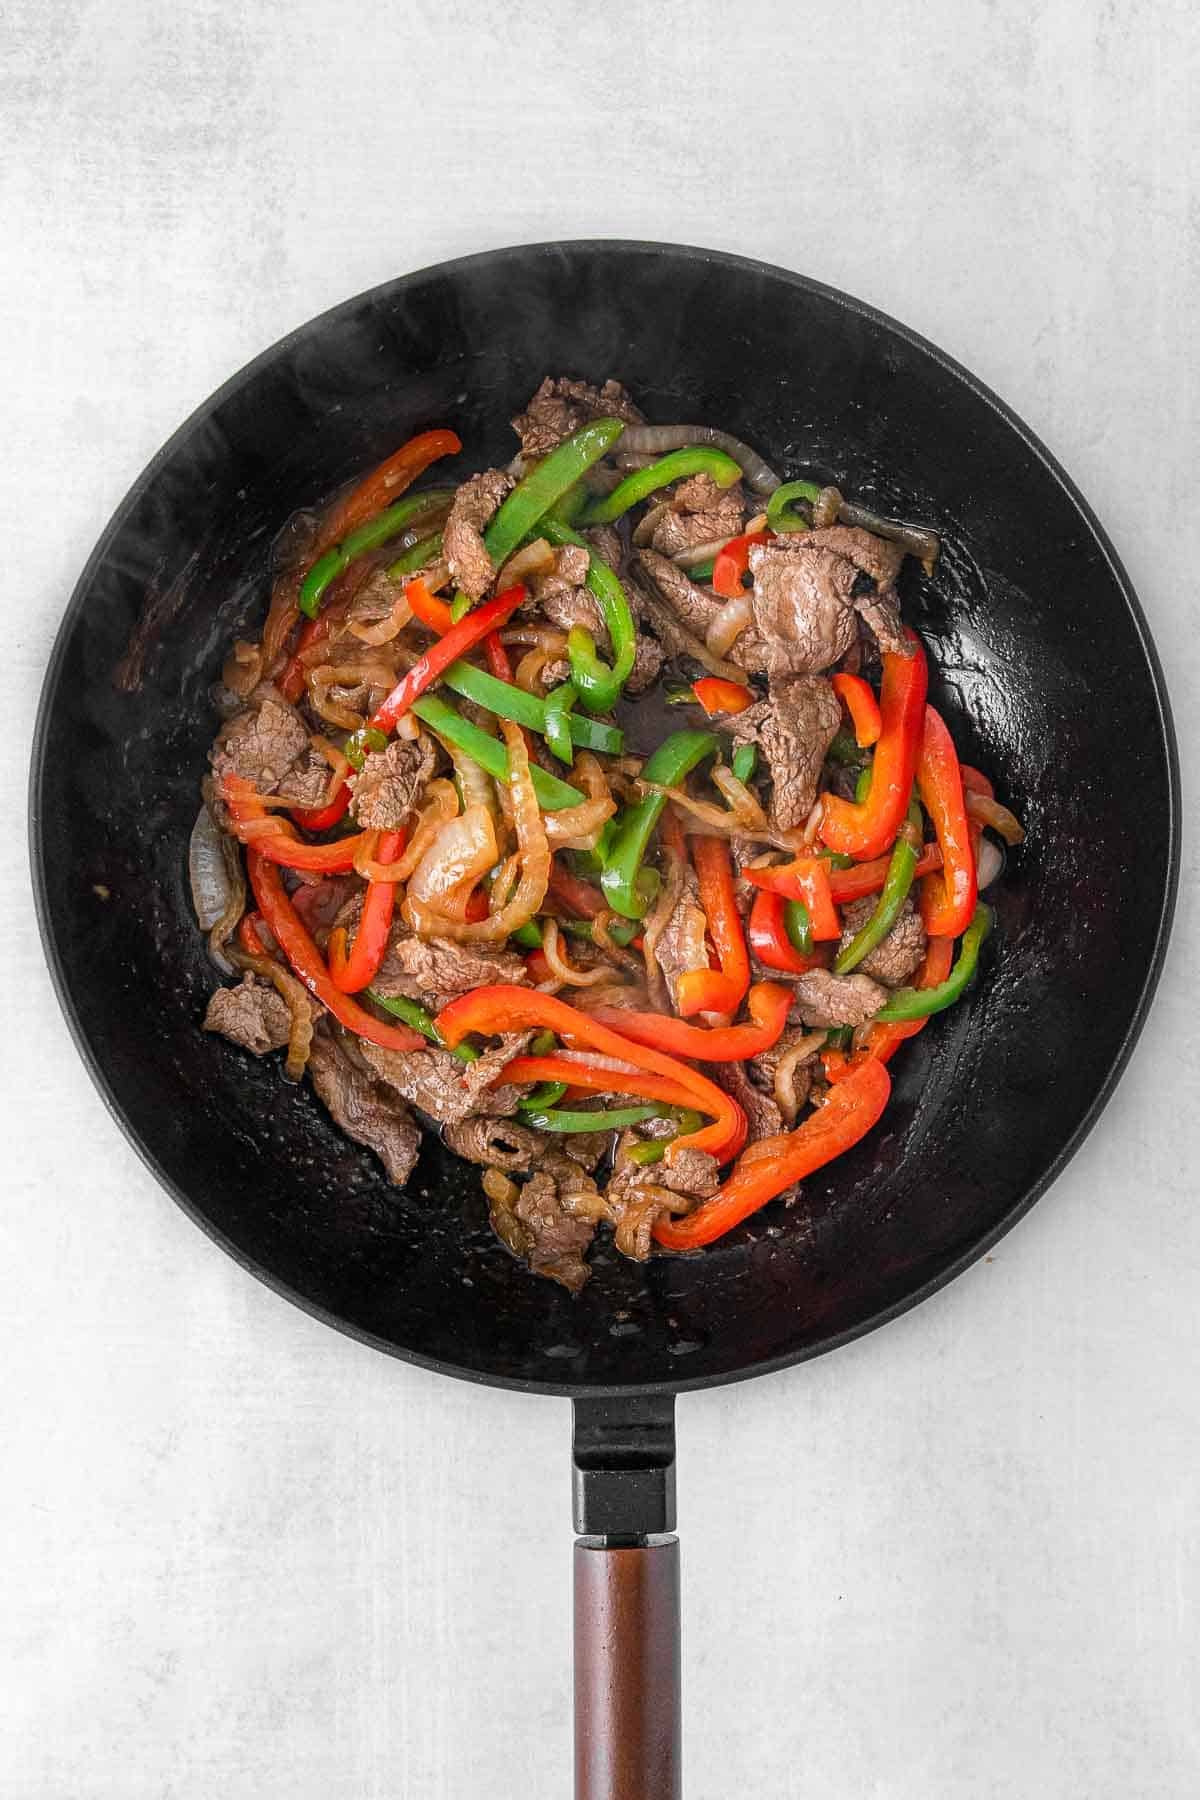 Skillet with steak, onion and bell peppers.